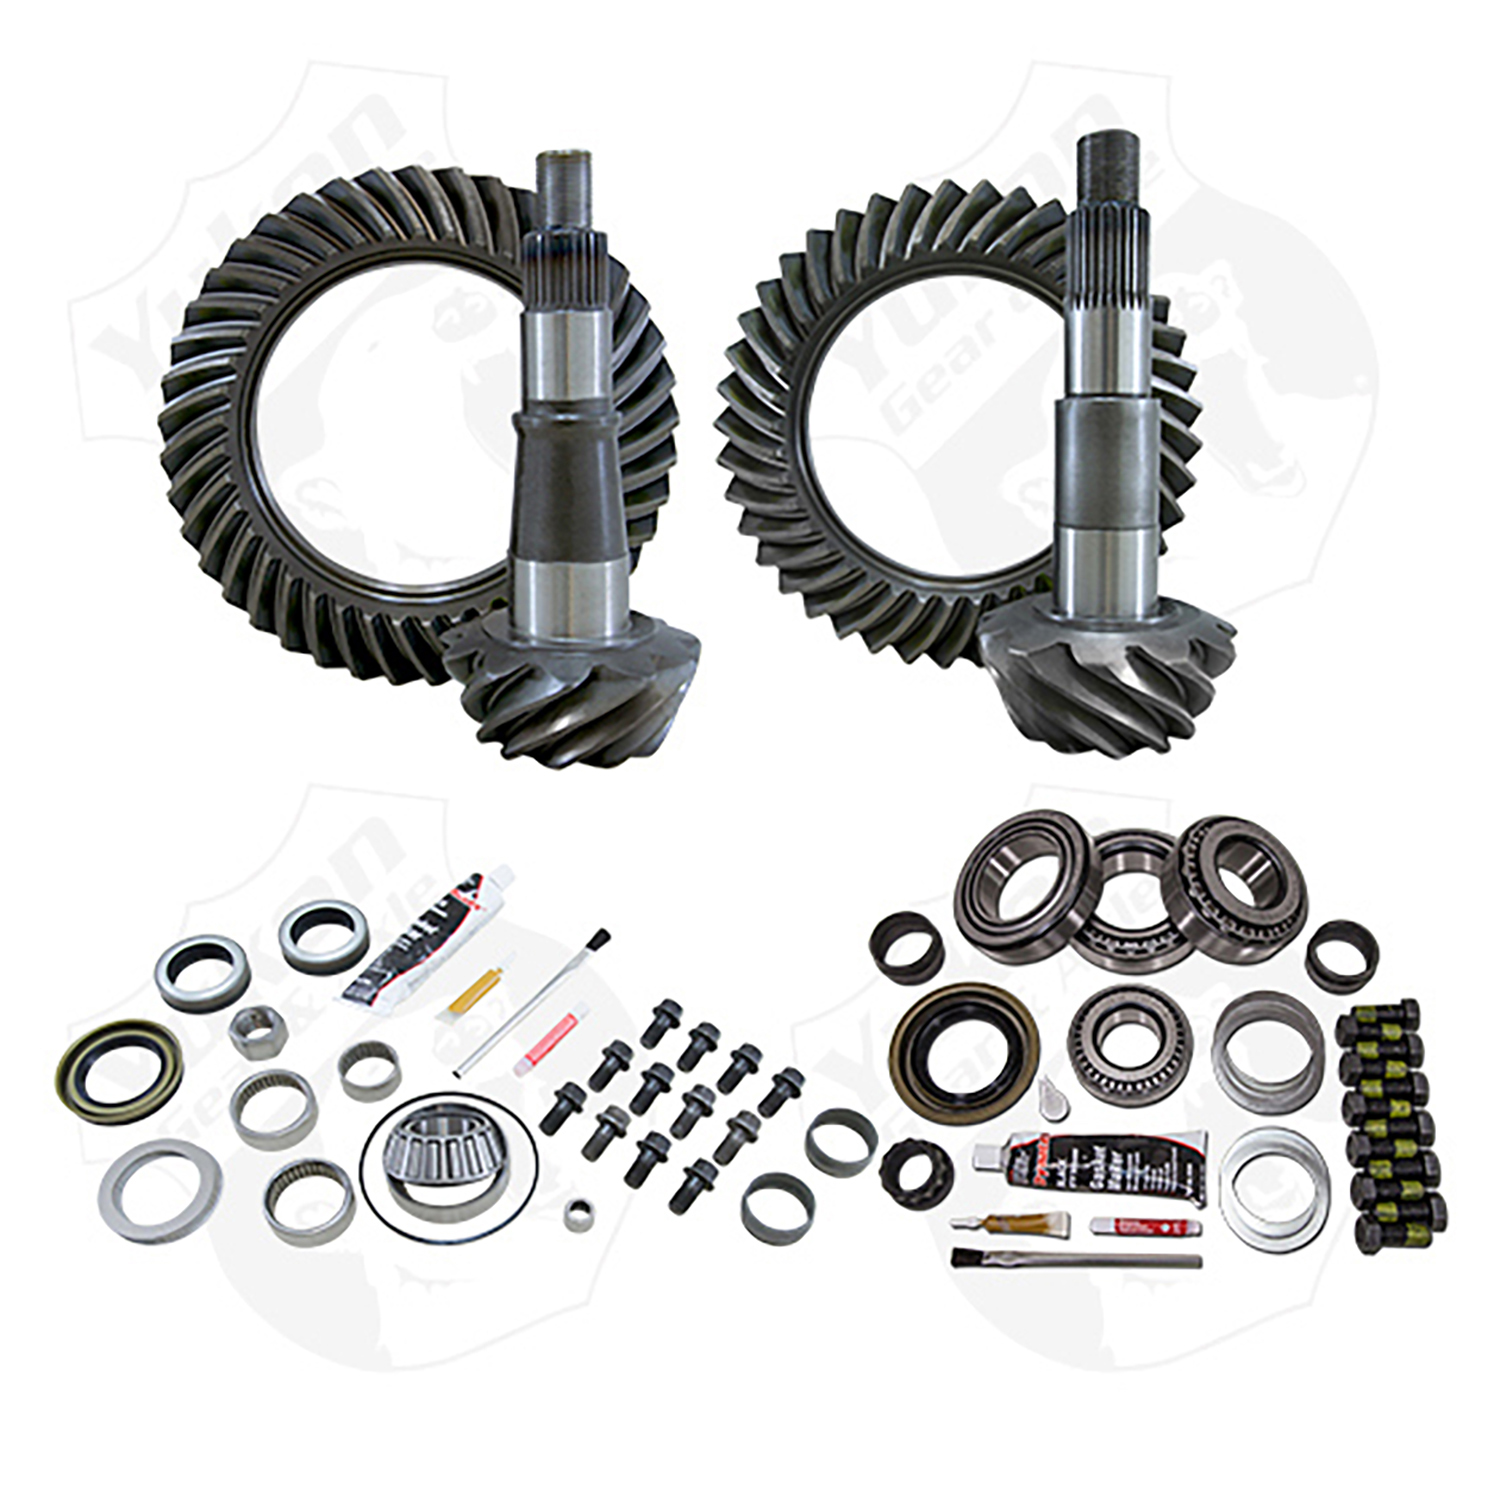 Gear & Install Kit Package For 2003-2011 Ram 2500 And 3500, 4.11 Ratio